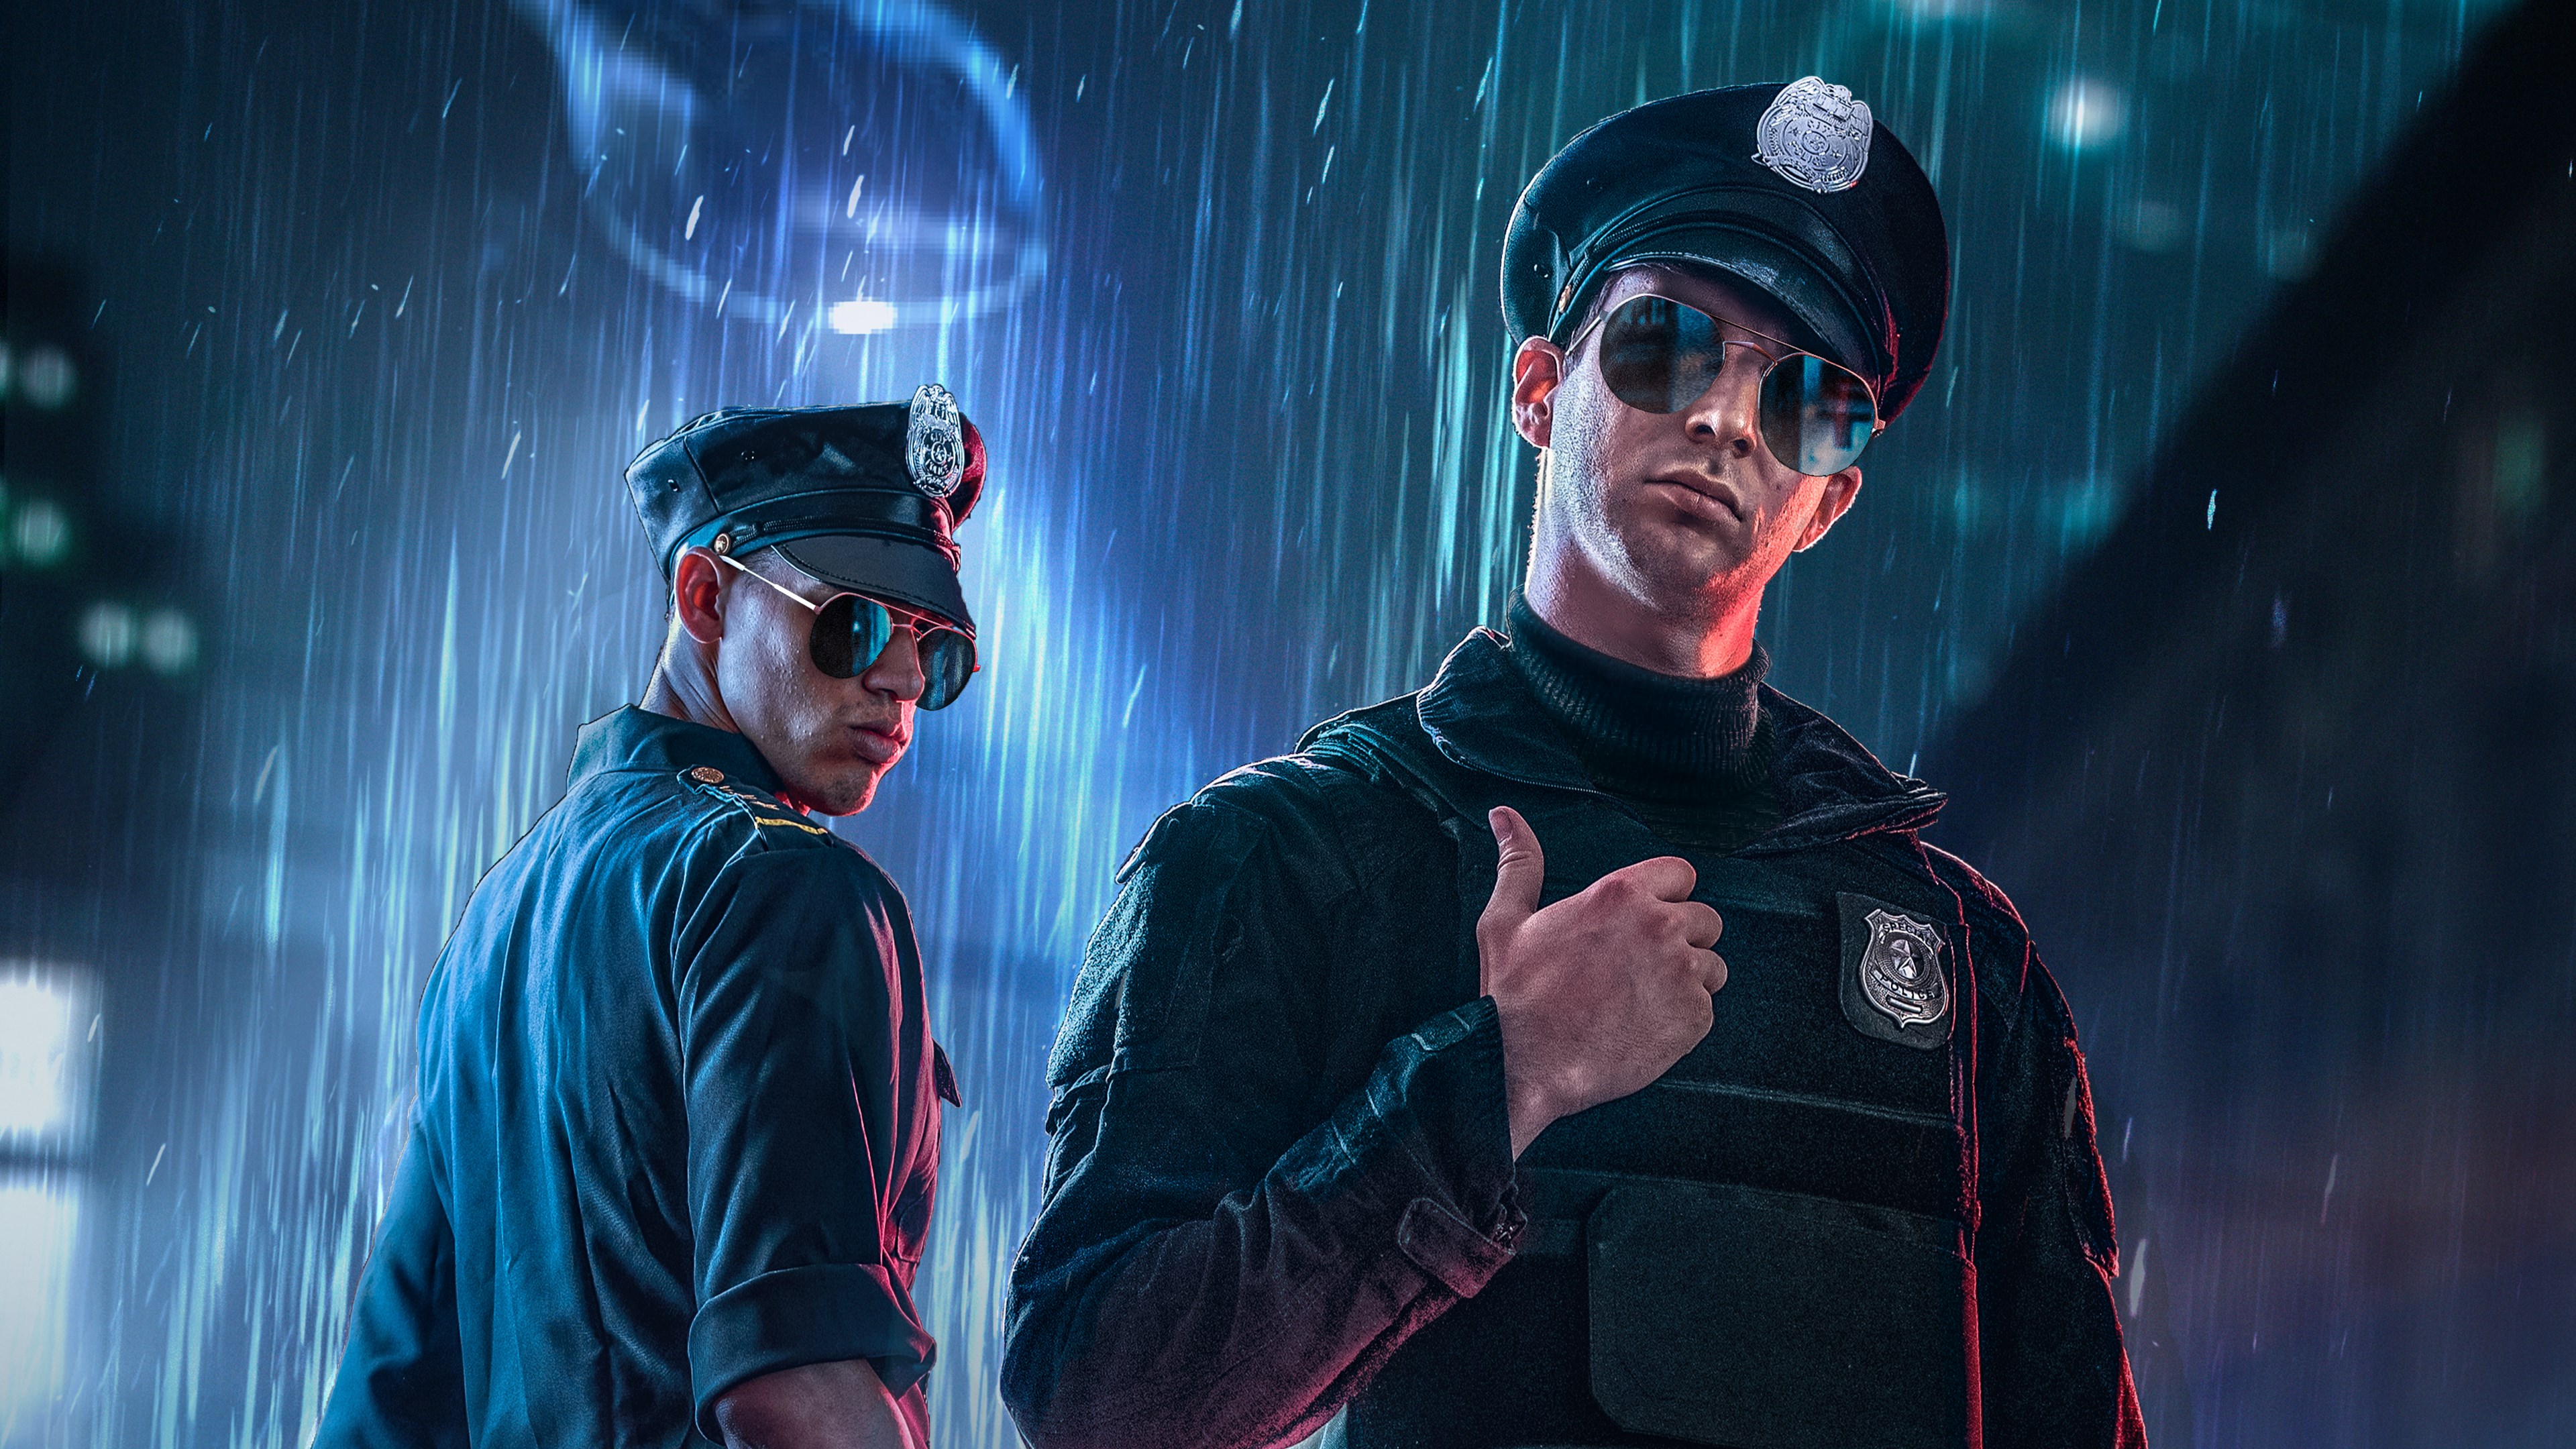 best police games on xbox one